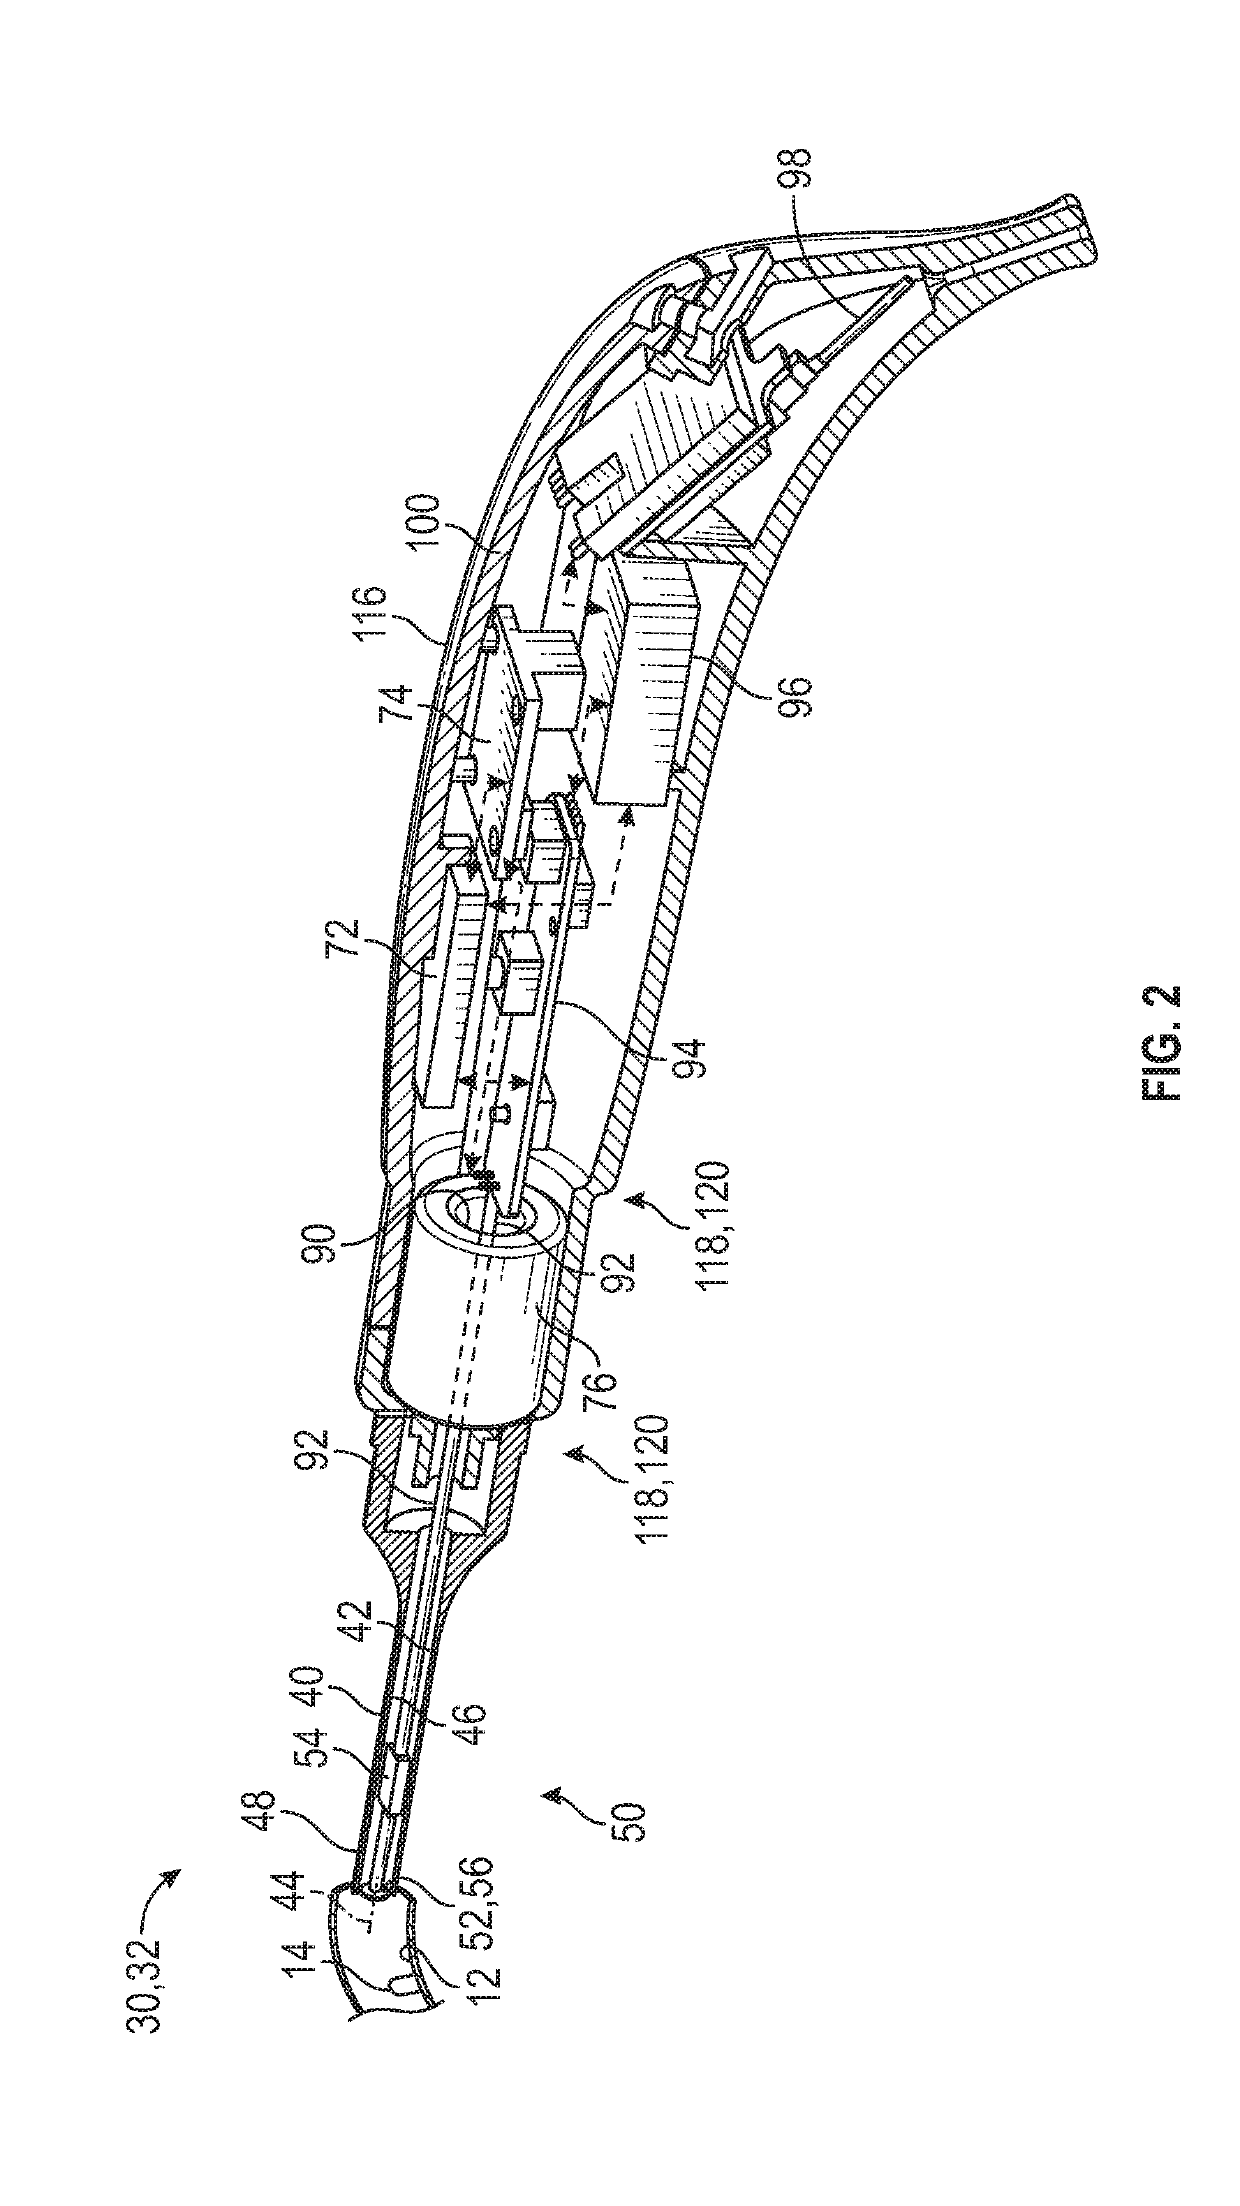 Ear instrument assembly